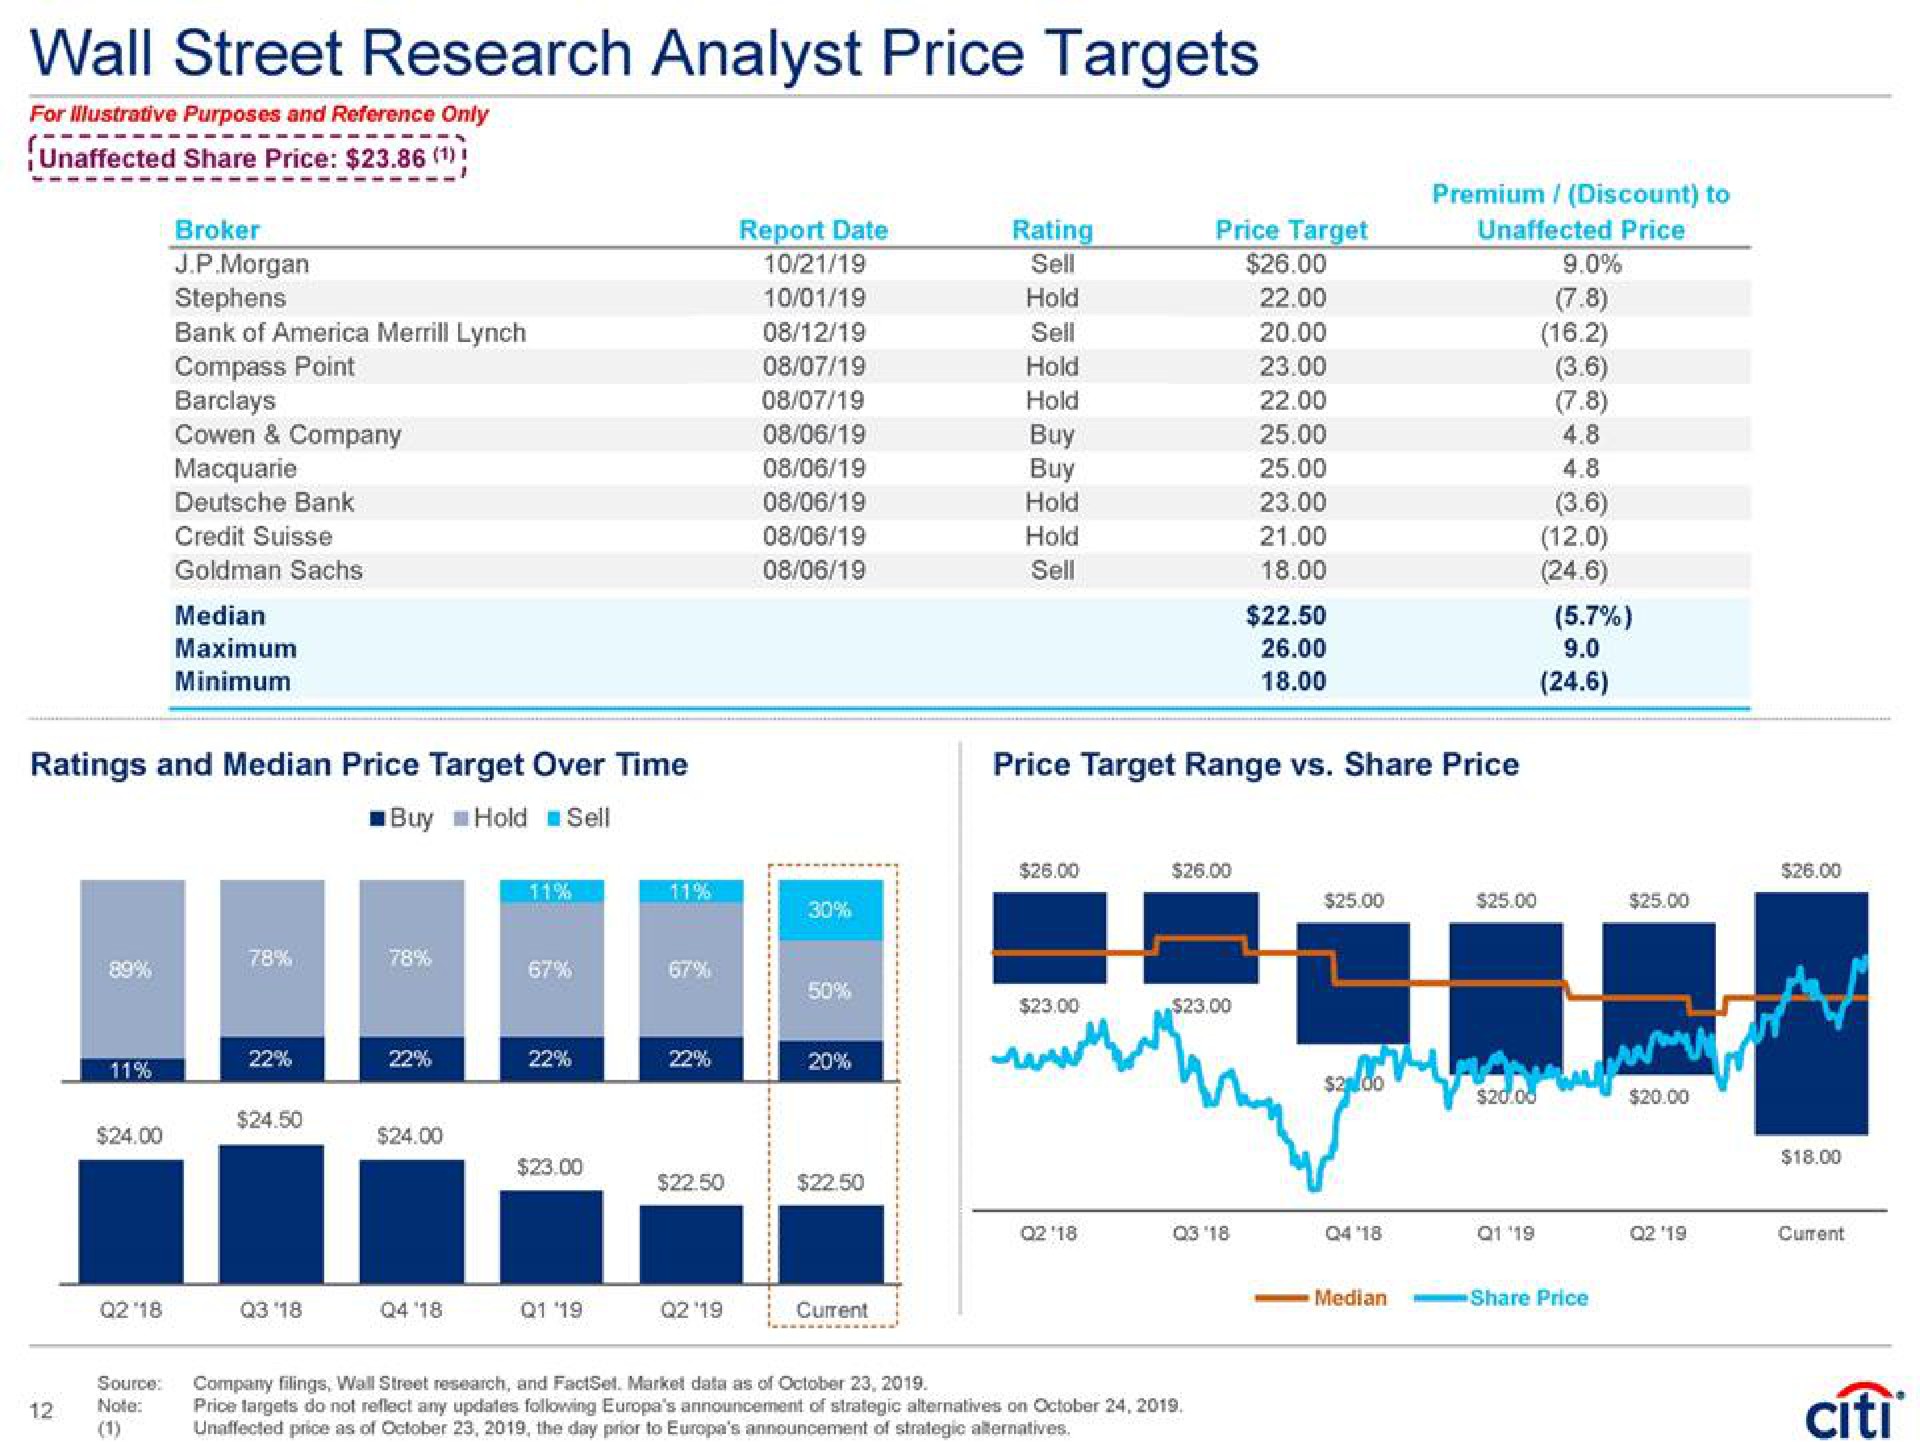 wall street research analyst price targets median hold a a | Citi